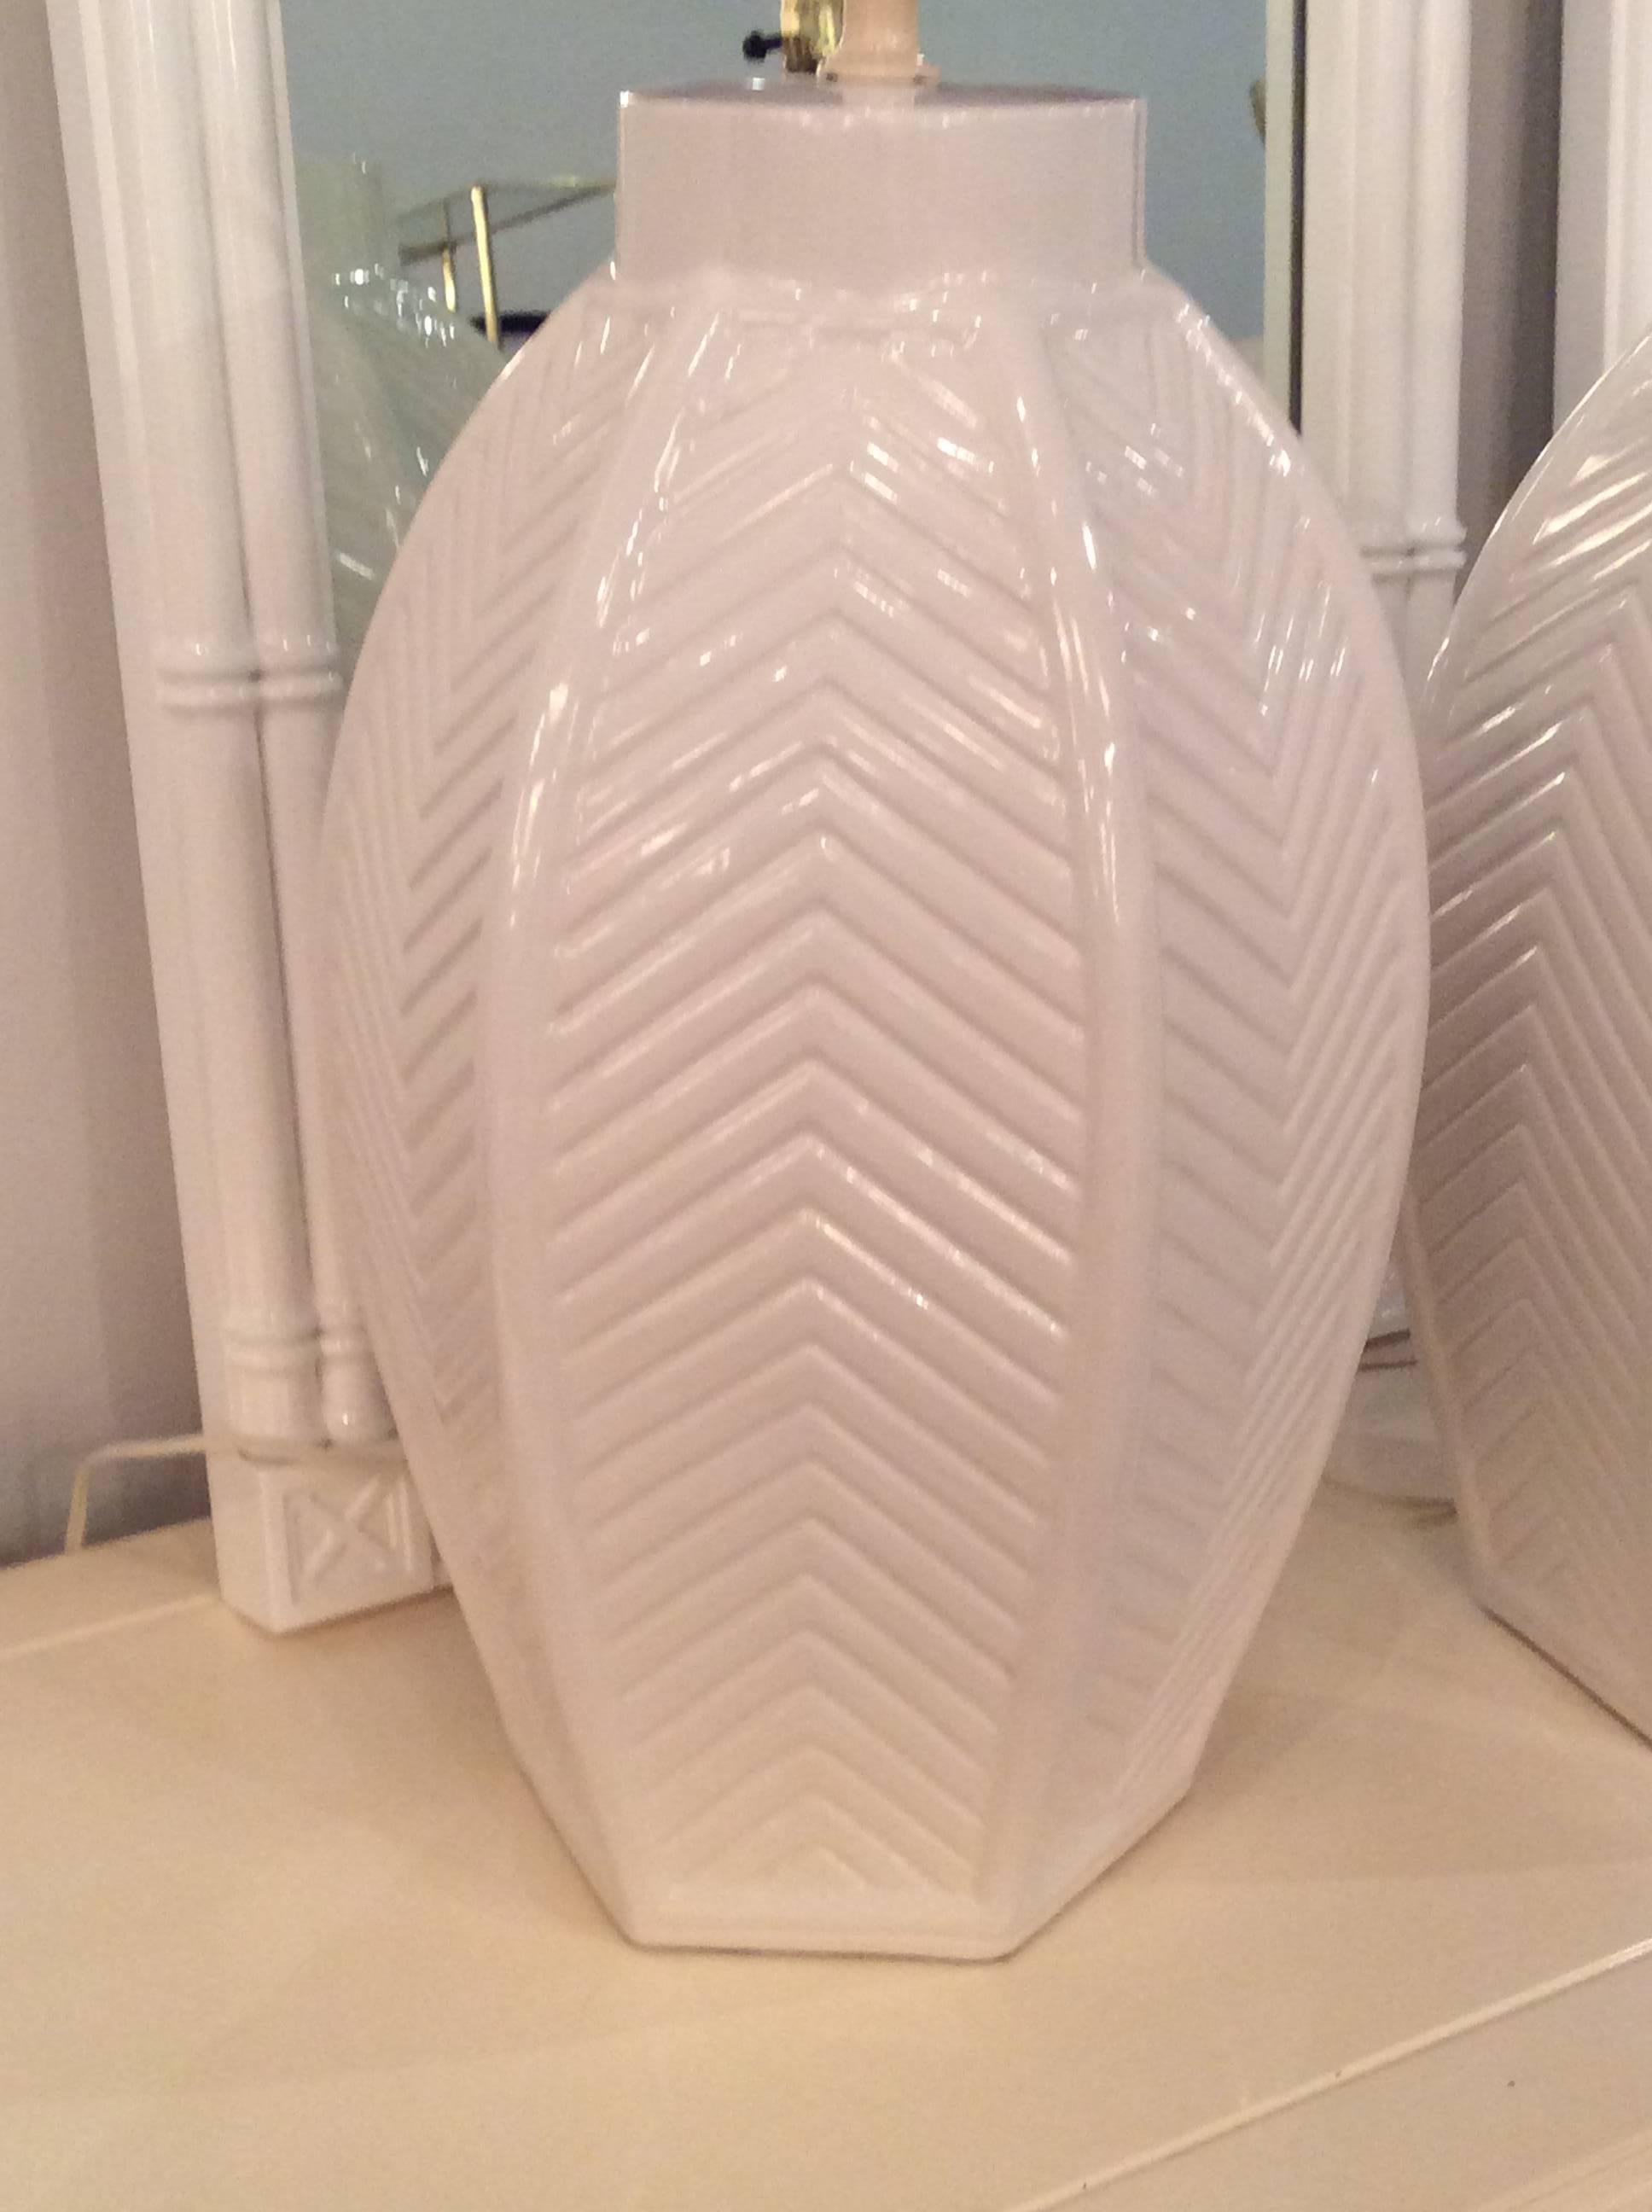 Pair of Vintage Oversized White Ceramic Chevron Table Lamps, Hollywood Regency For Sale 3